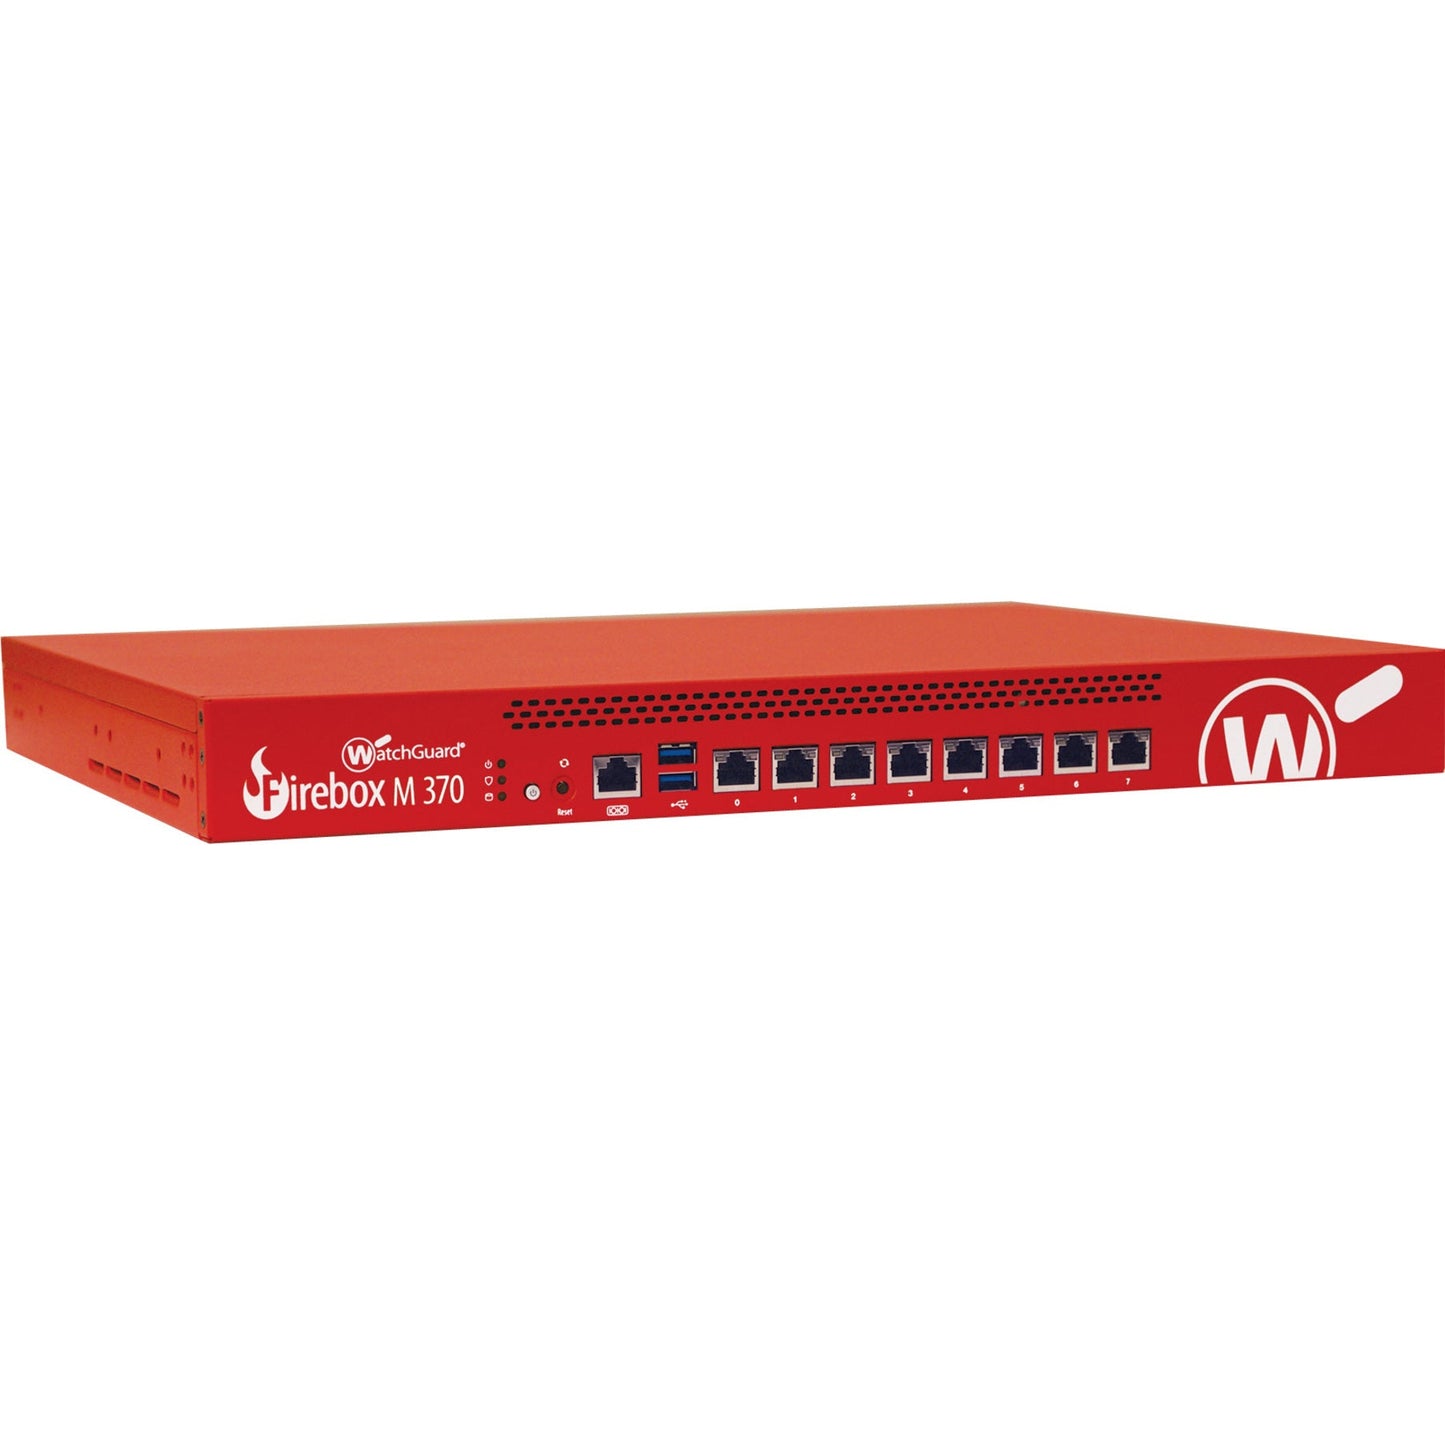 Trade up to WatchGuard Firebox M370 with 3-yr Total Security Suite